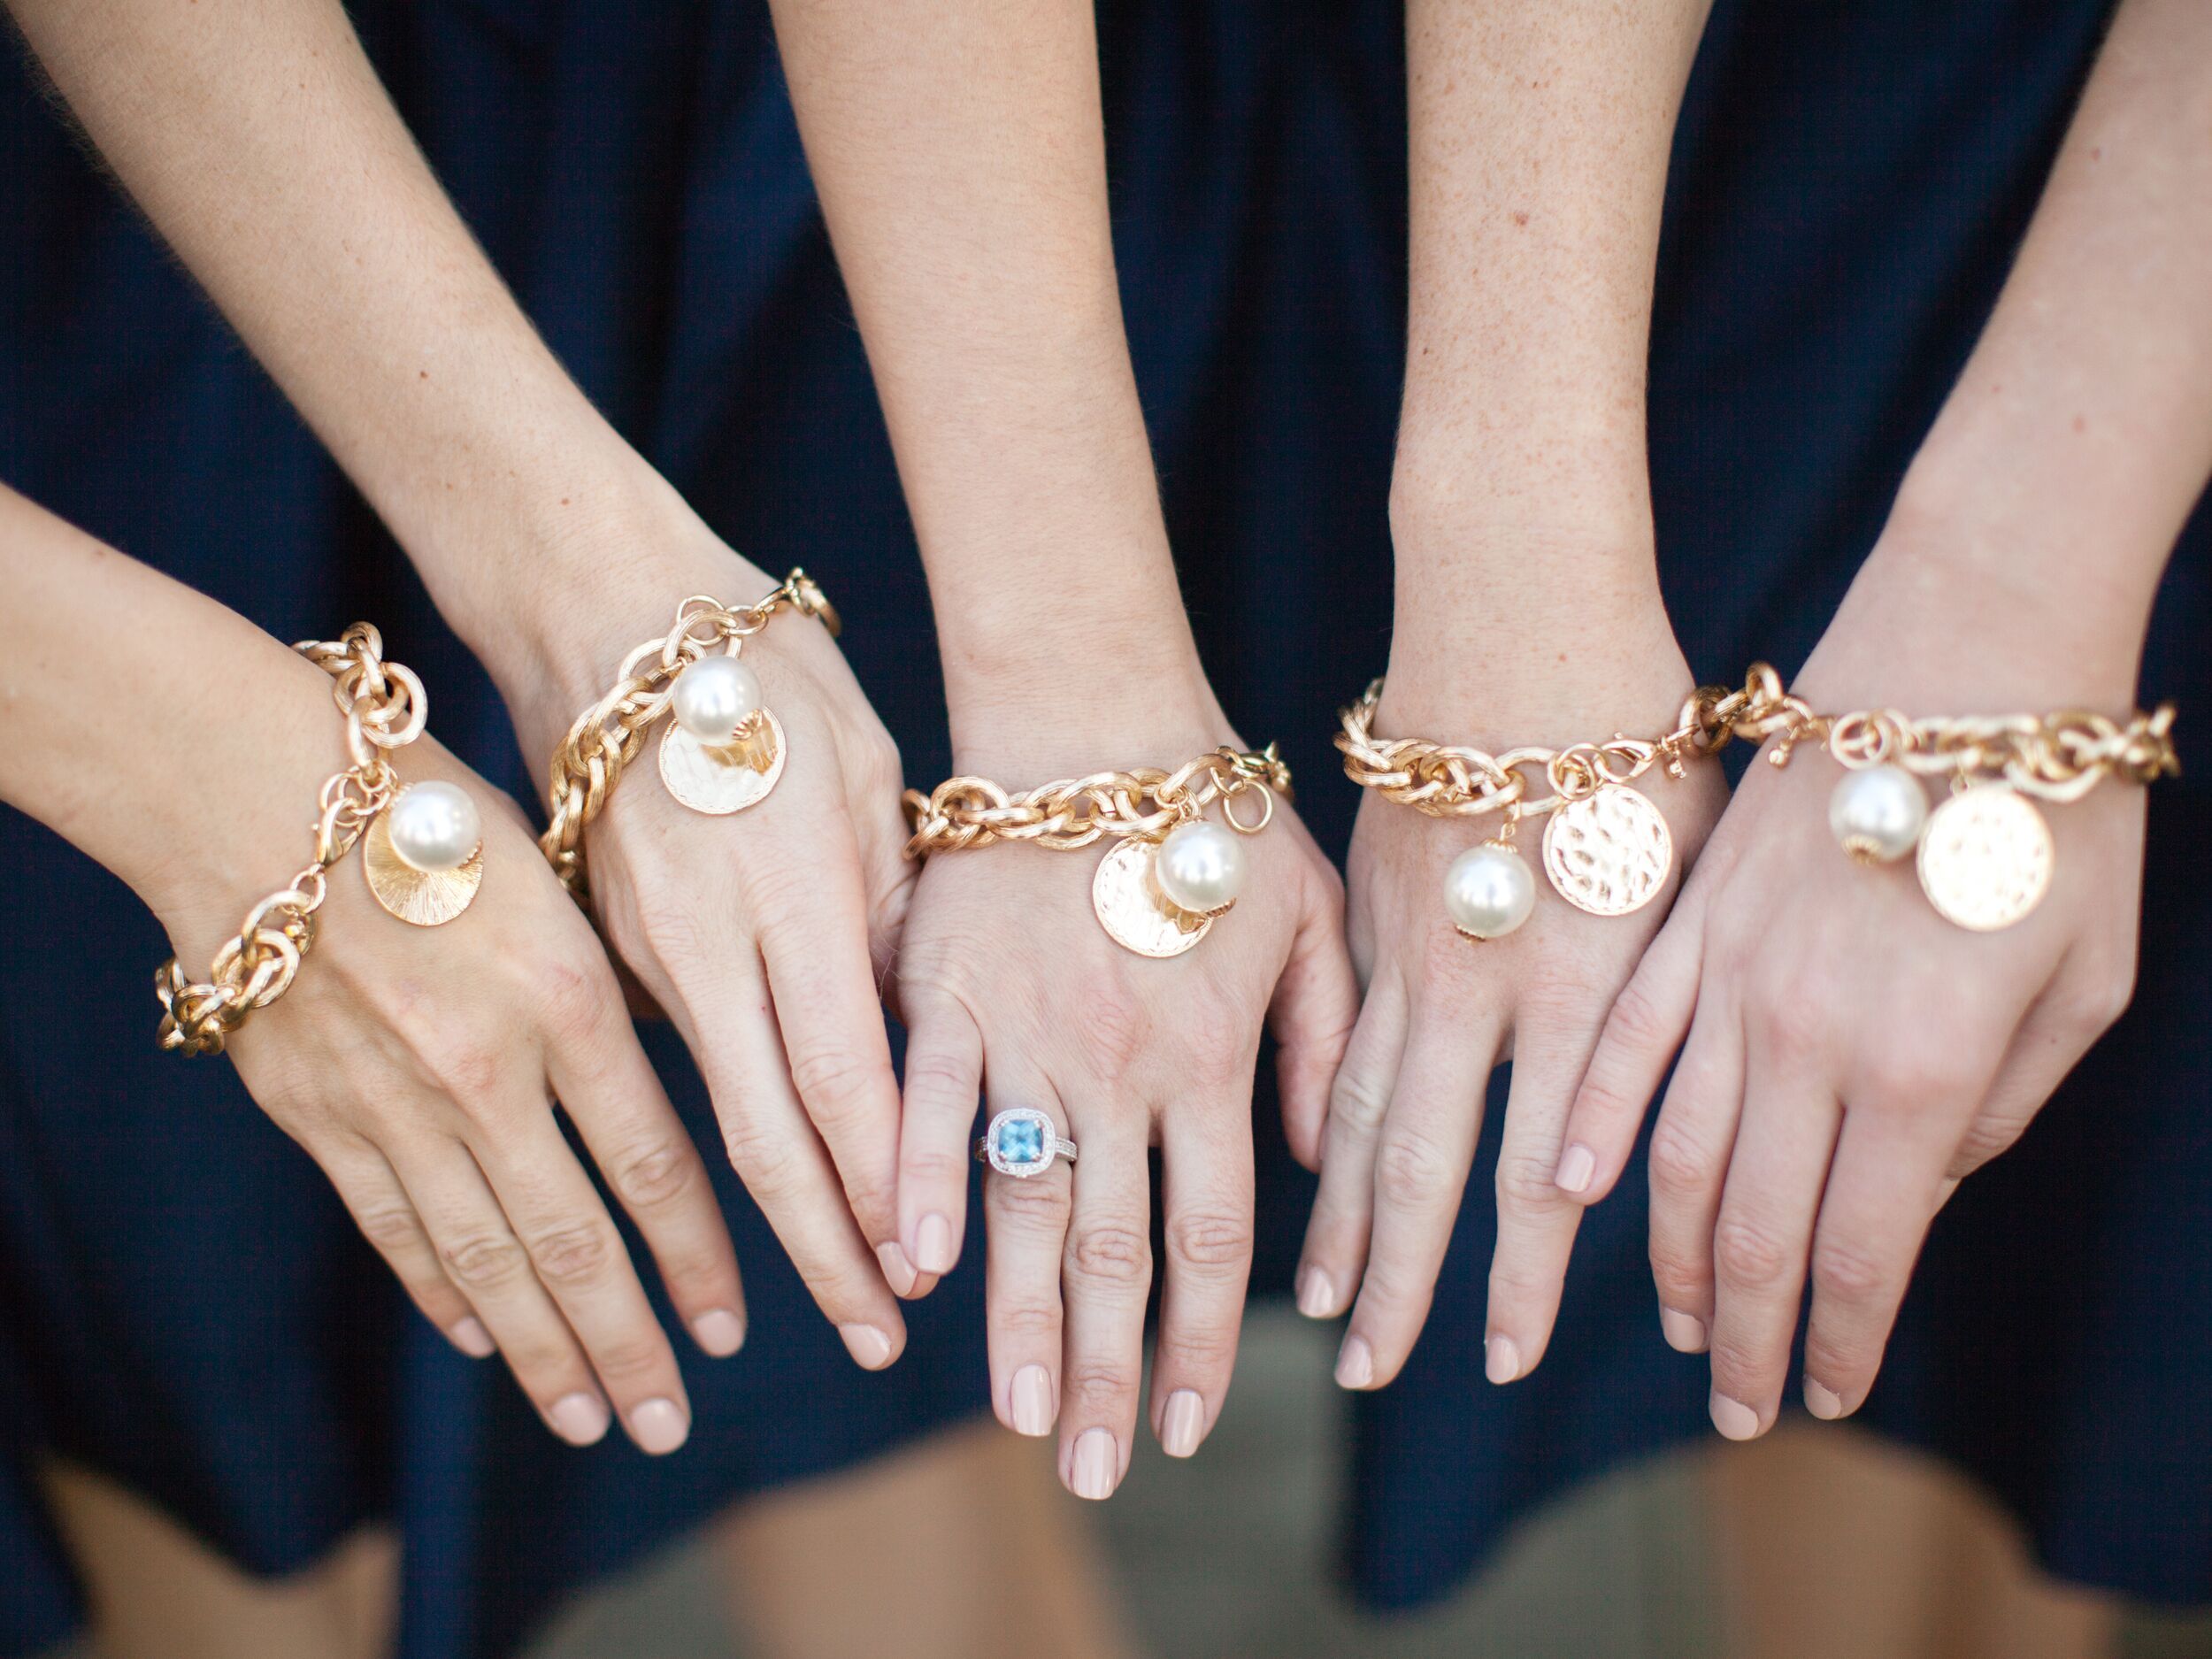 Monogrammed gold and pearl bridesmaid bracelet gifts -   Great Personalized Bridesmaid Gifts